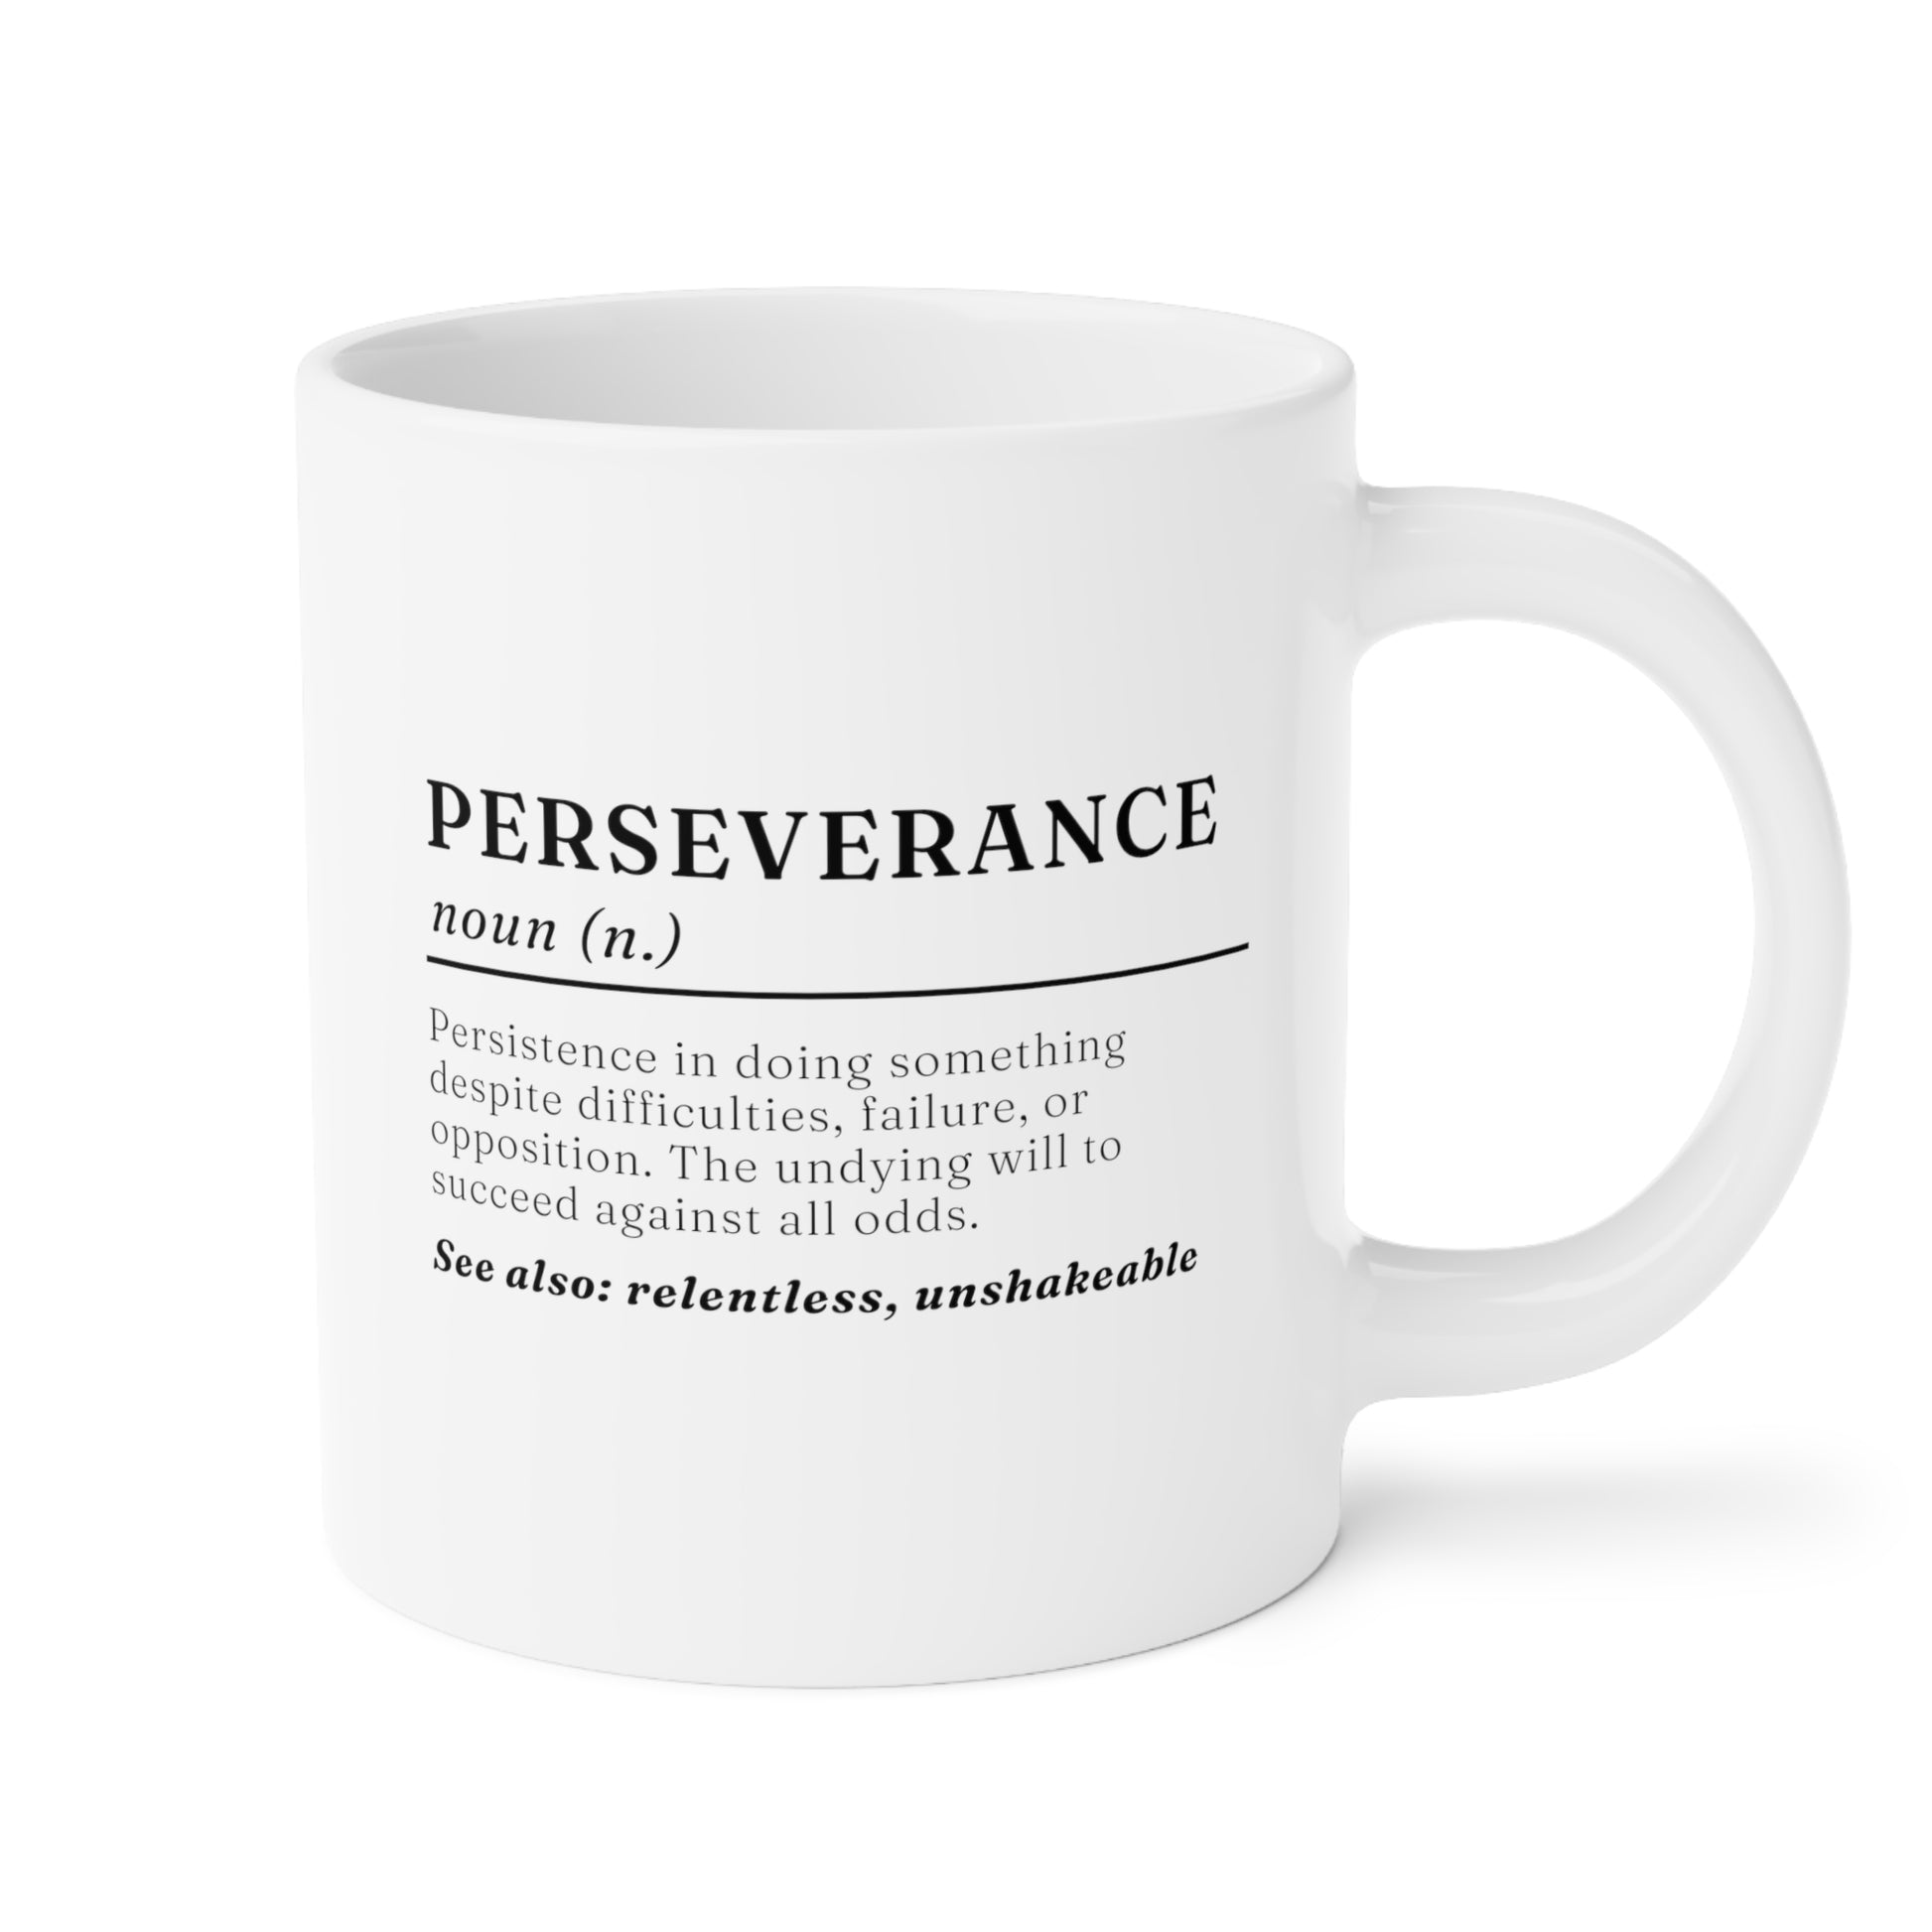 Perseverance Definition 20oz white funny large coffee mug gift for friend motivational inspirational support resilience tough waveywares wavey wares wavywares wavy wares